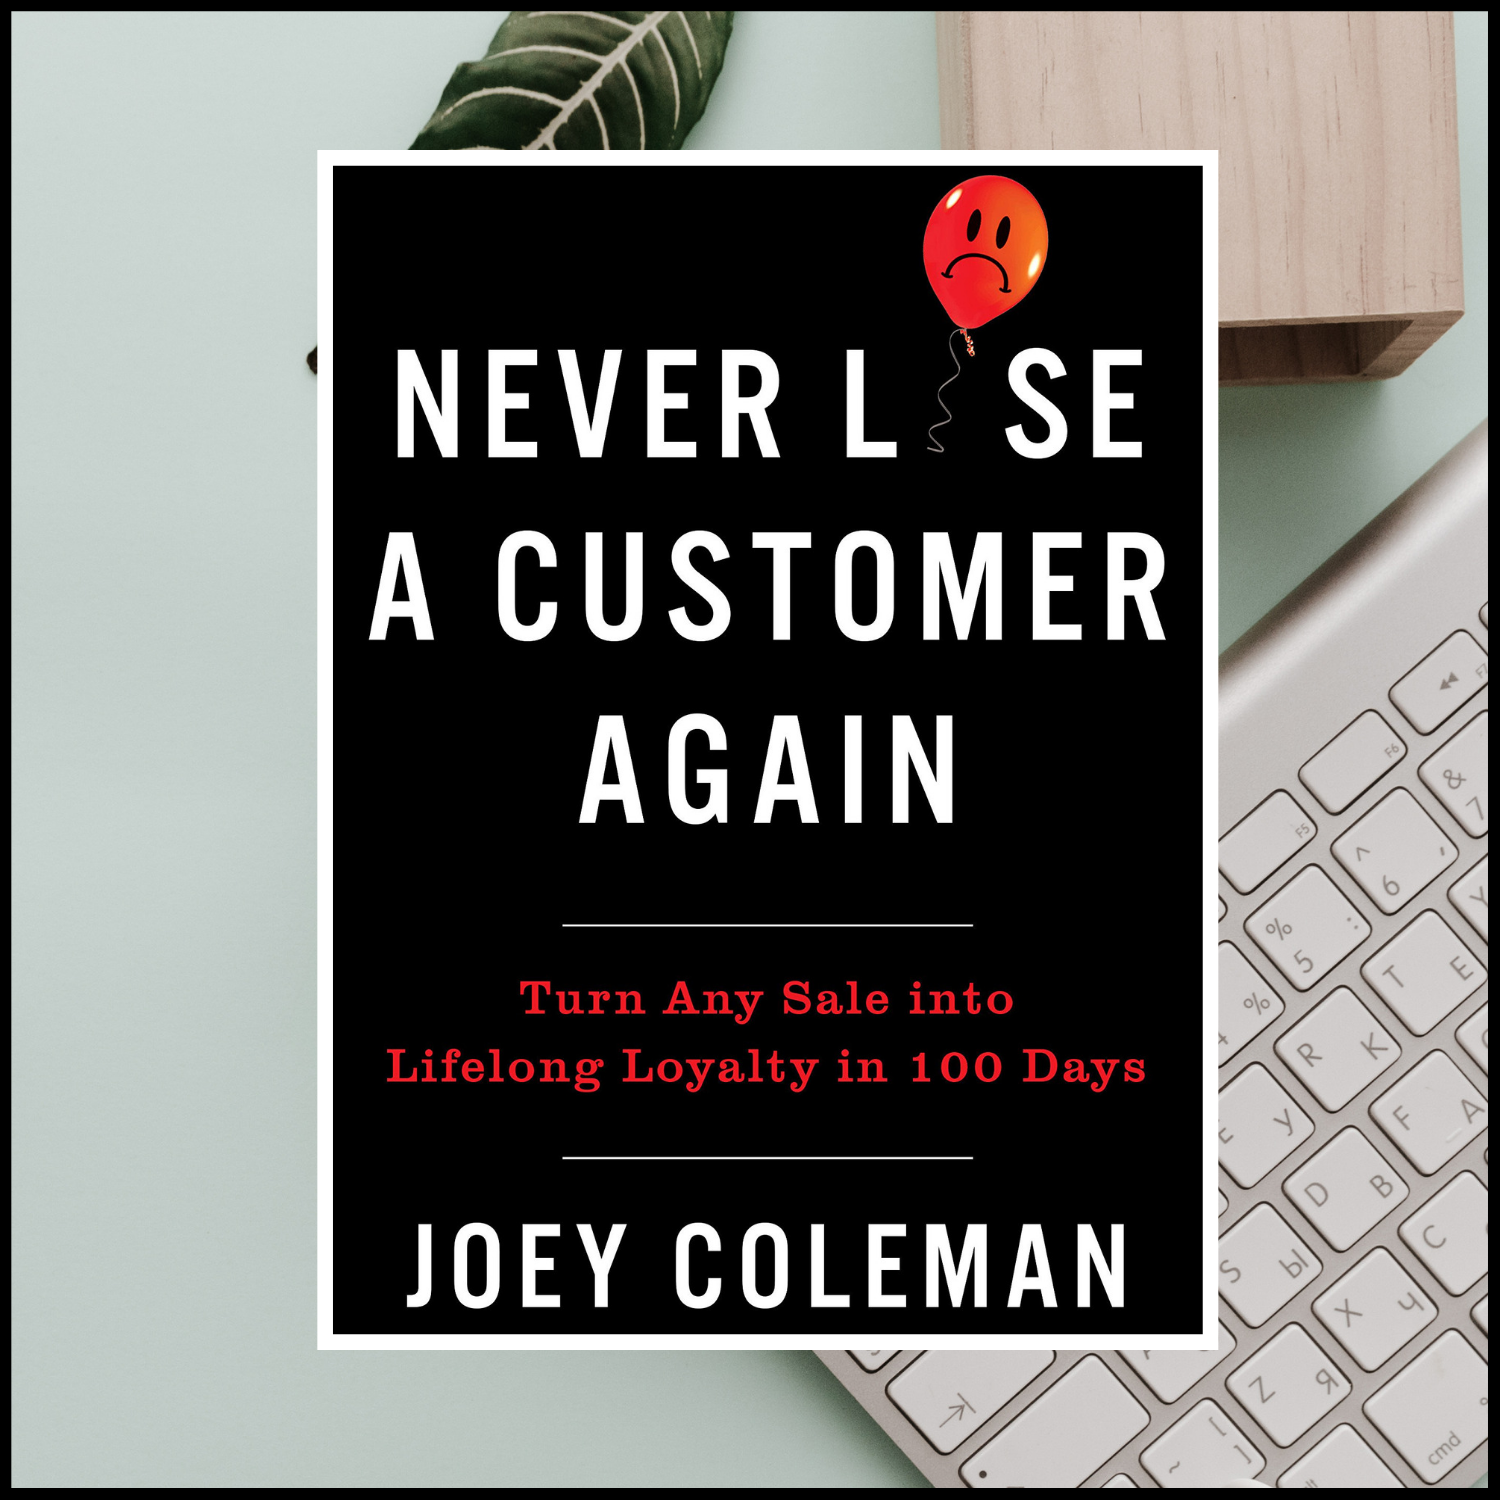 Never Lose A Customer Again by Joey Coleman